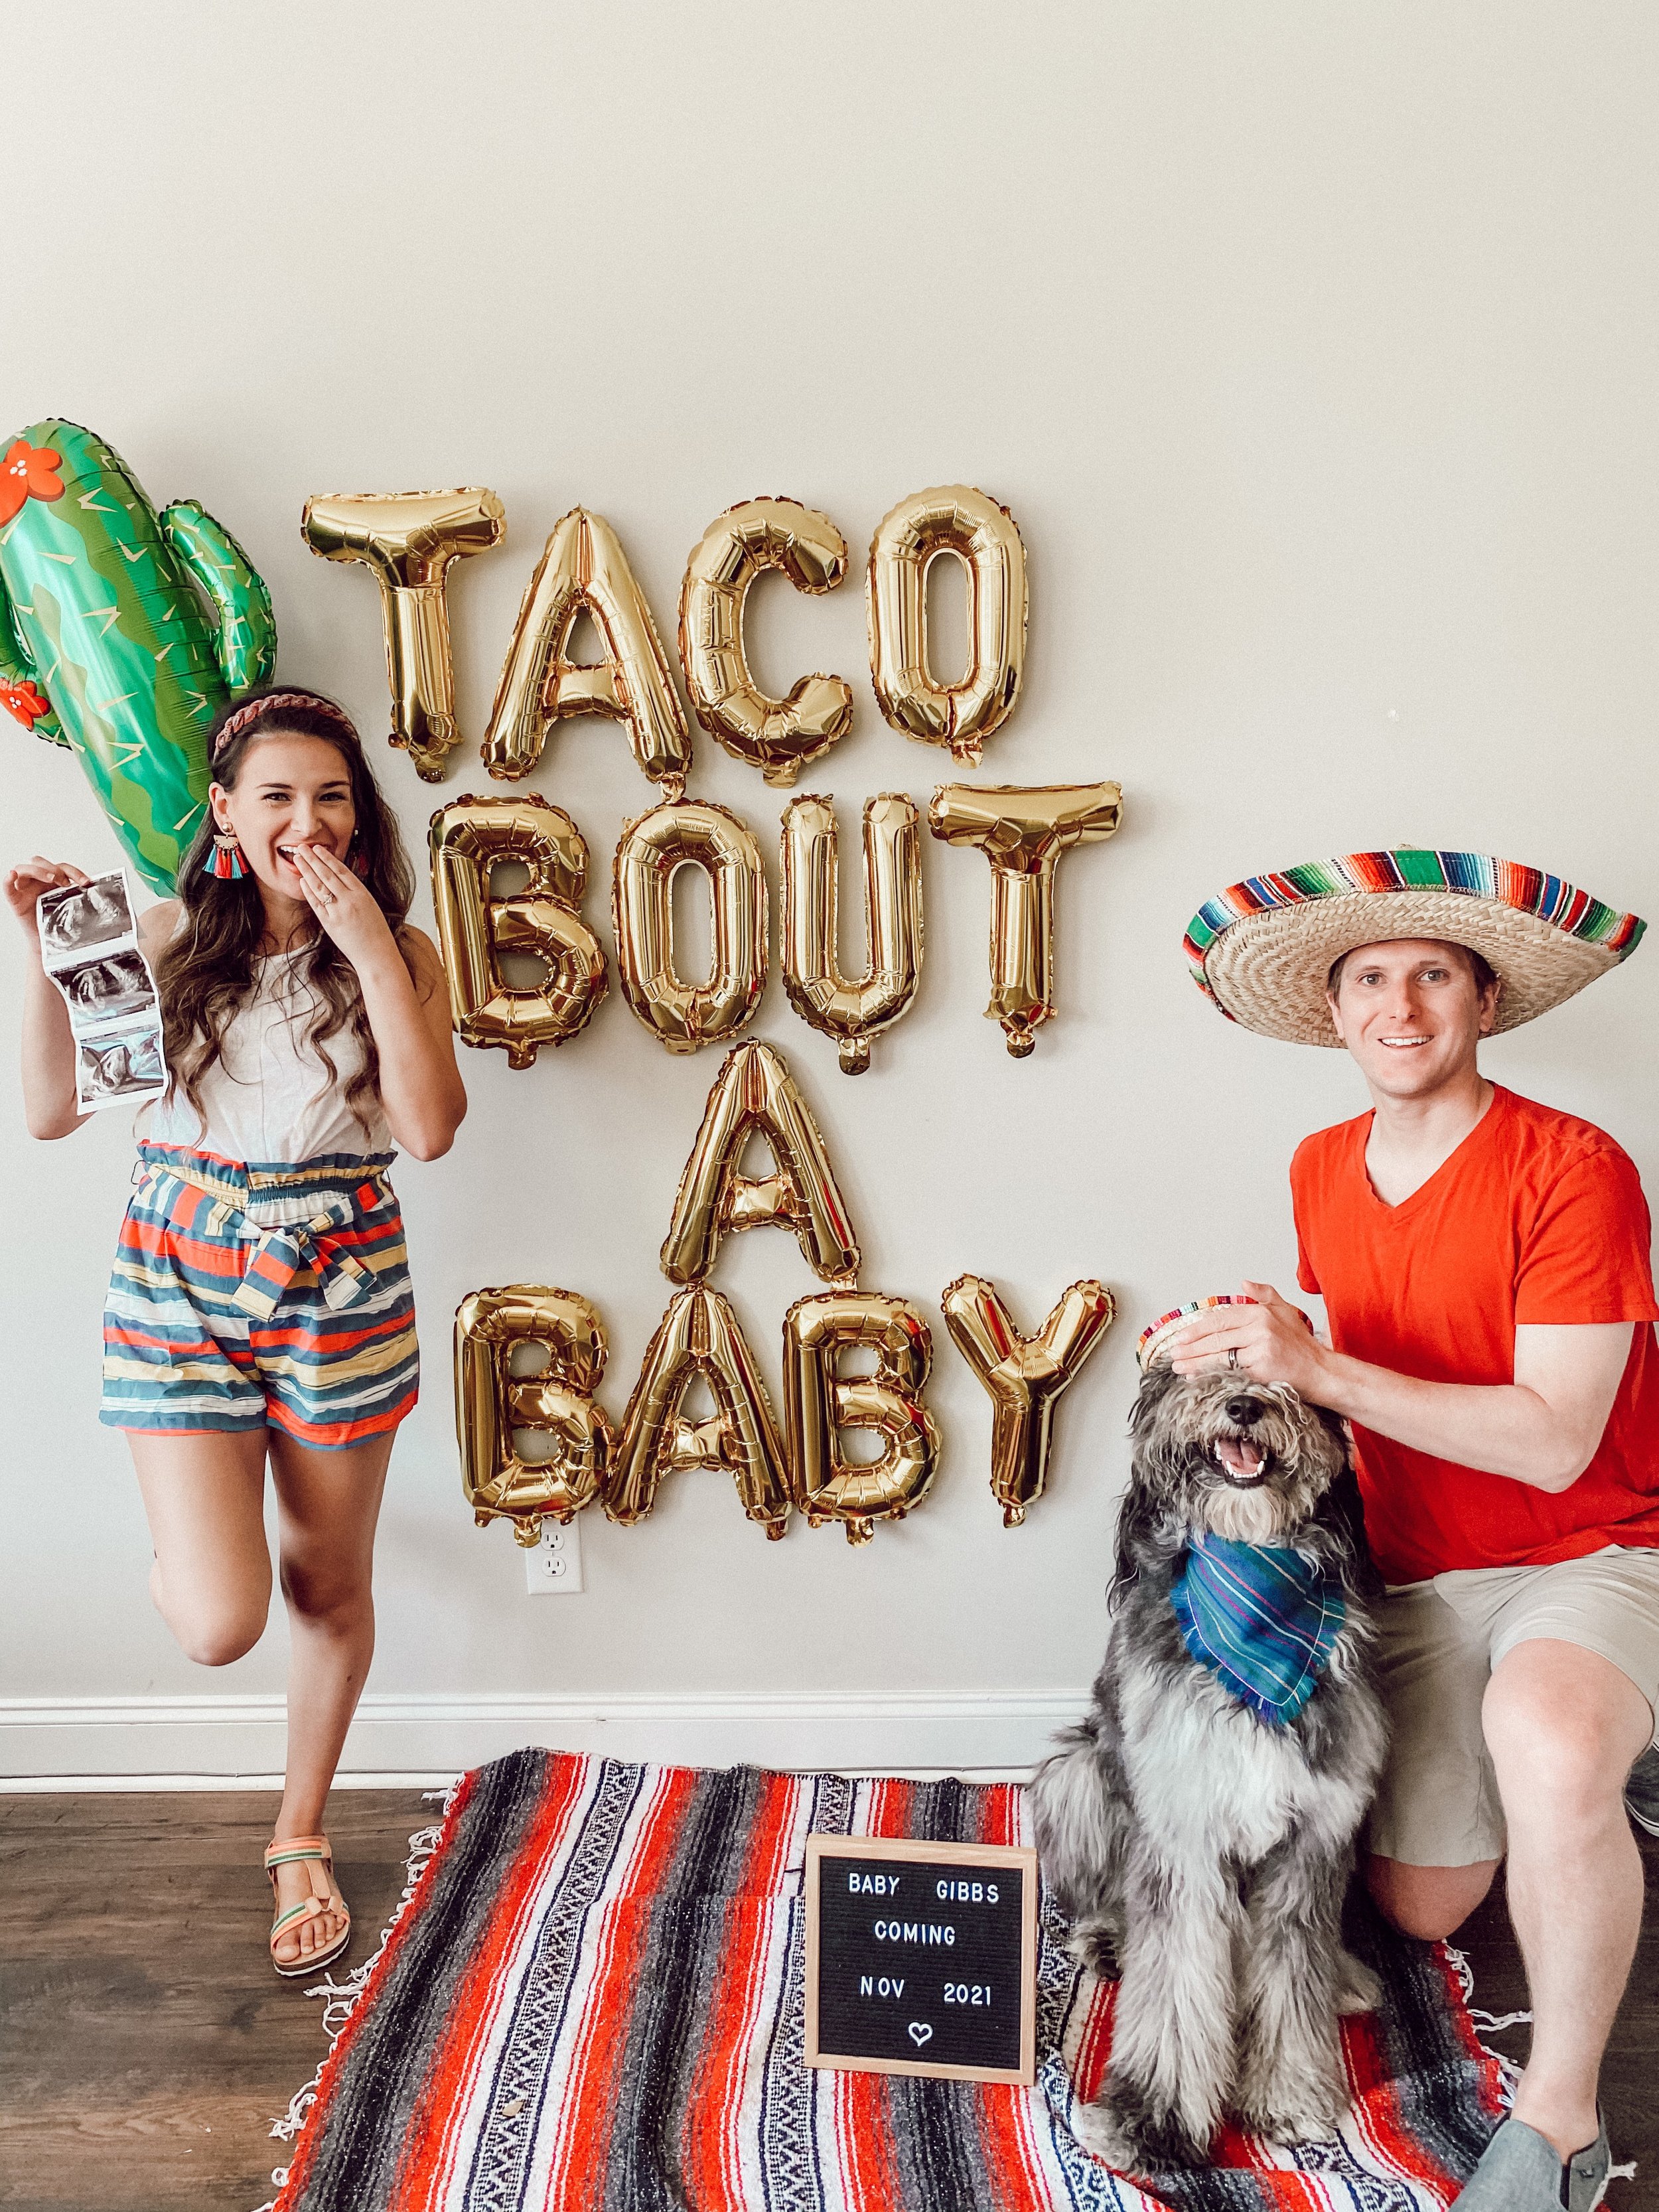 taco bout a baby.jpg